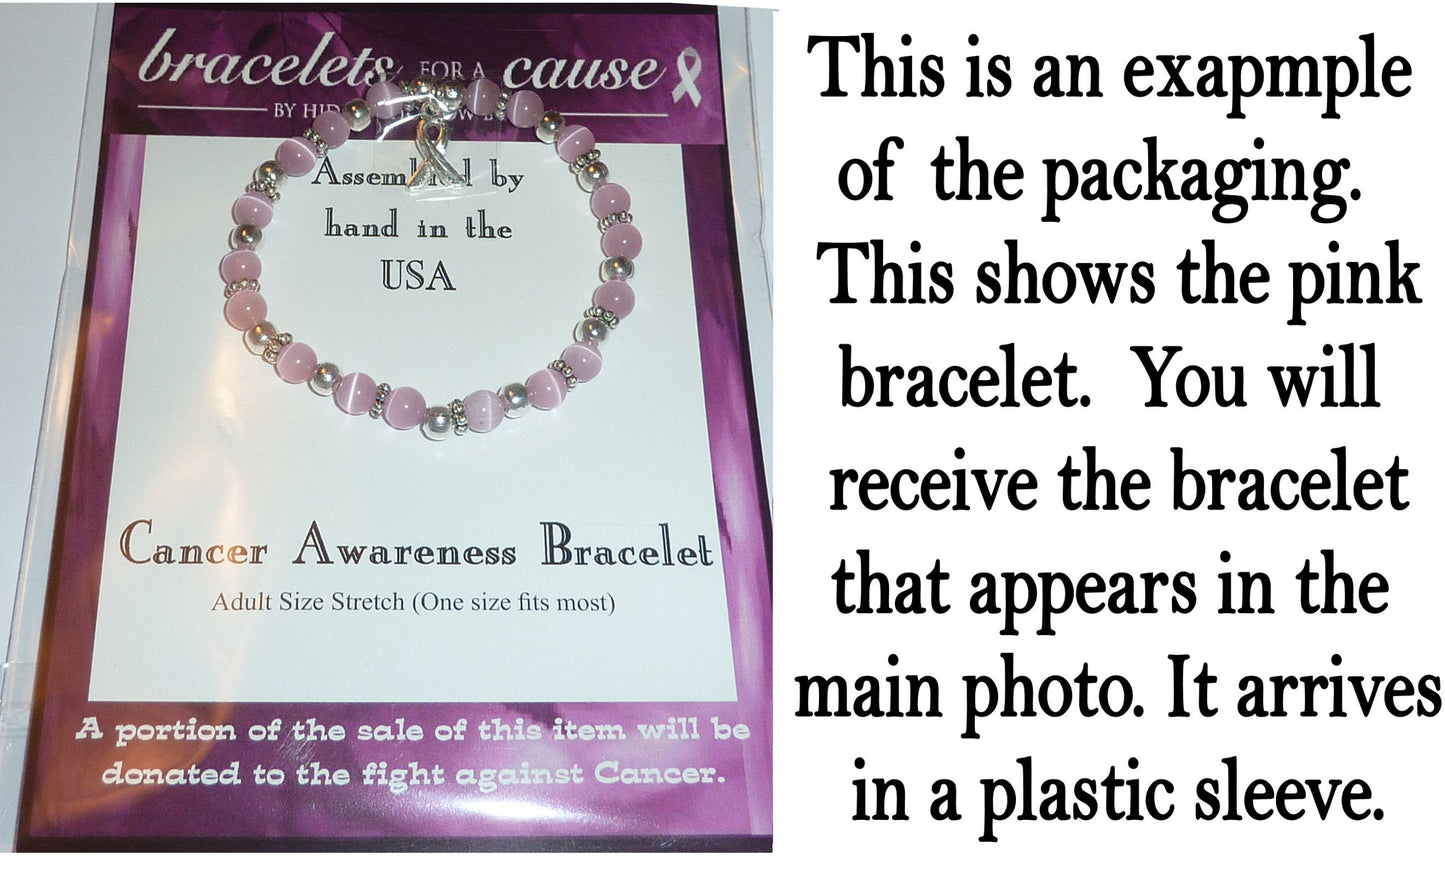 Teal (Ovarian Cancer) Packaged Cancer Awareness Bracelet 6mm - Stretch (will stretch to fit most Adults)